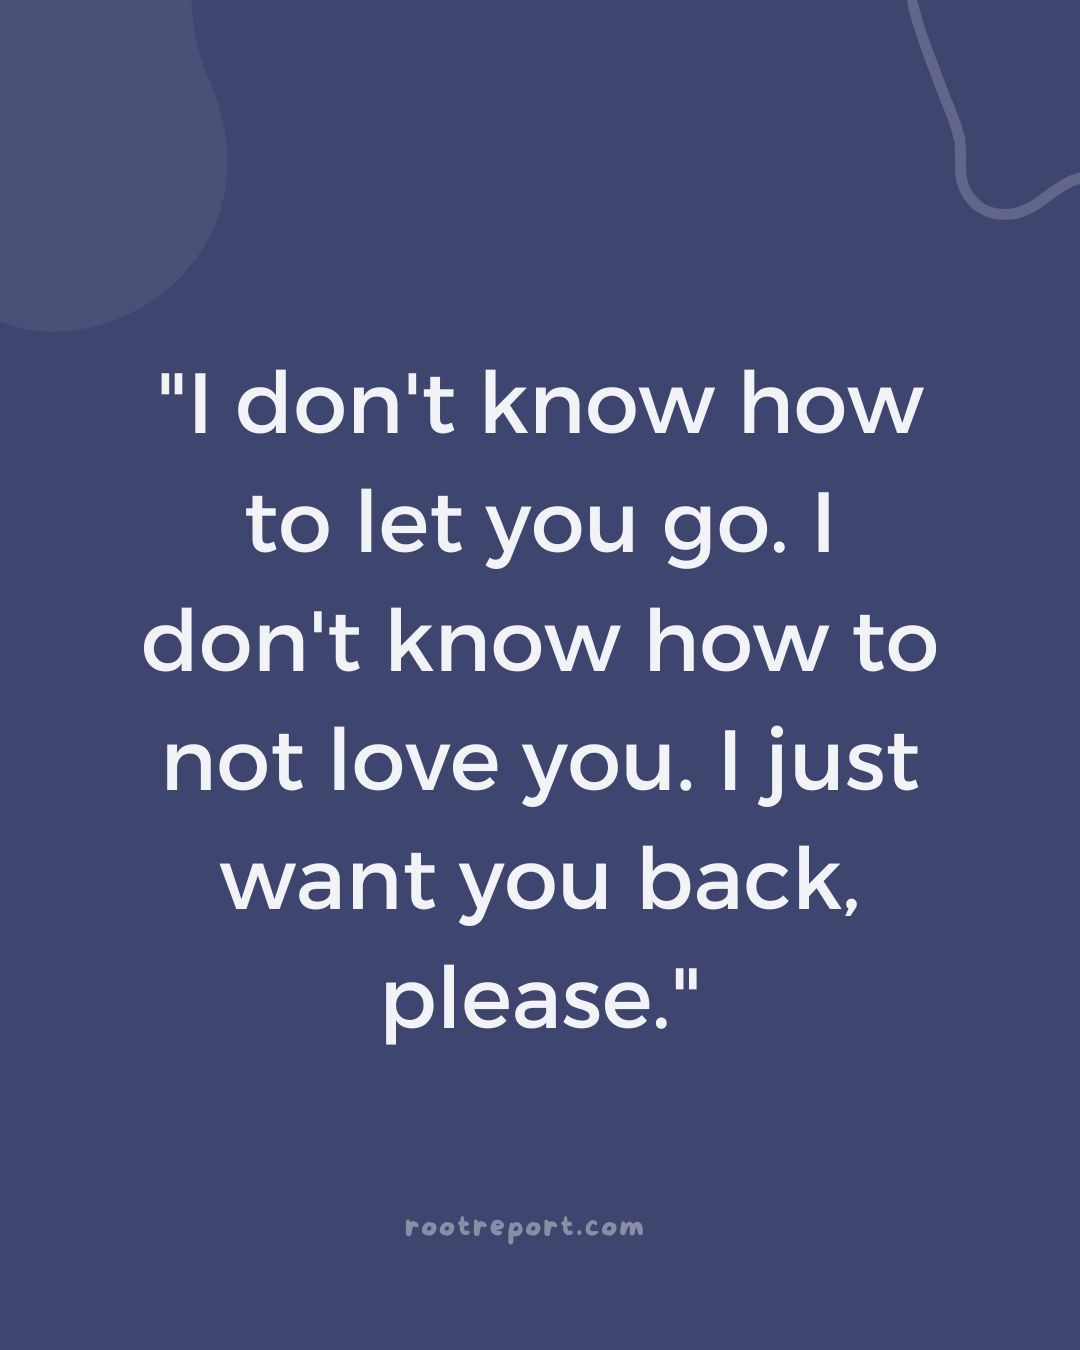 "I don't know how to let you go. I don't know how to not love you. I just want you back, please." 